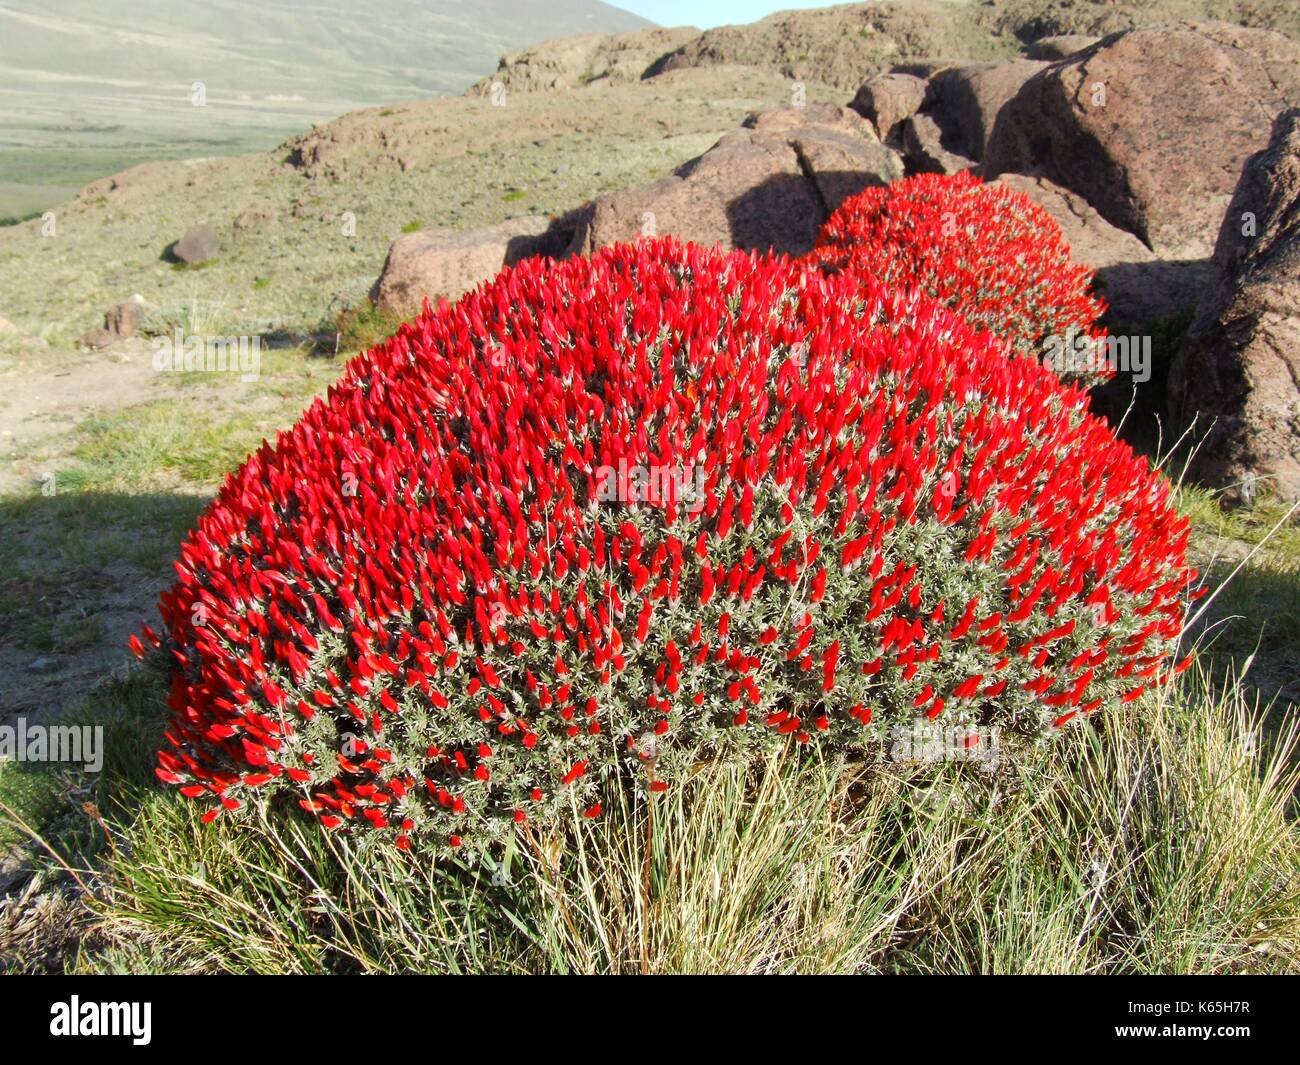 Anarthrophyllum desideratum, a bush with fiery red flowers, blossoming in Patagonia´s steppe near El Chalten, Argentina Stock Photo